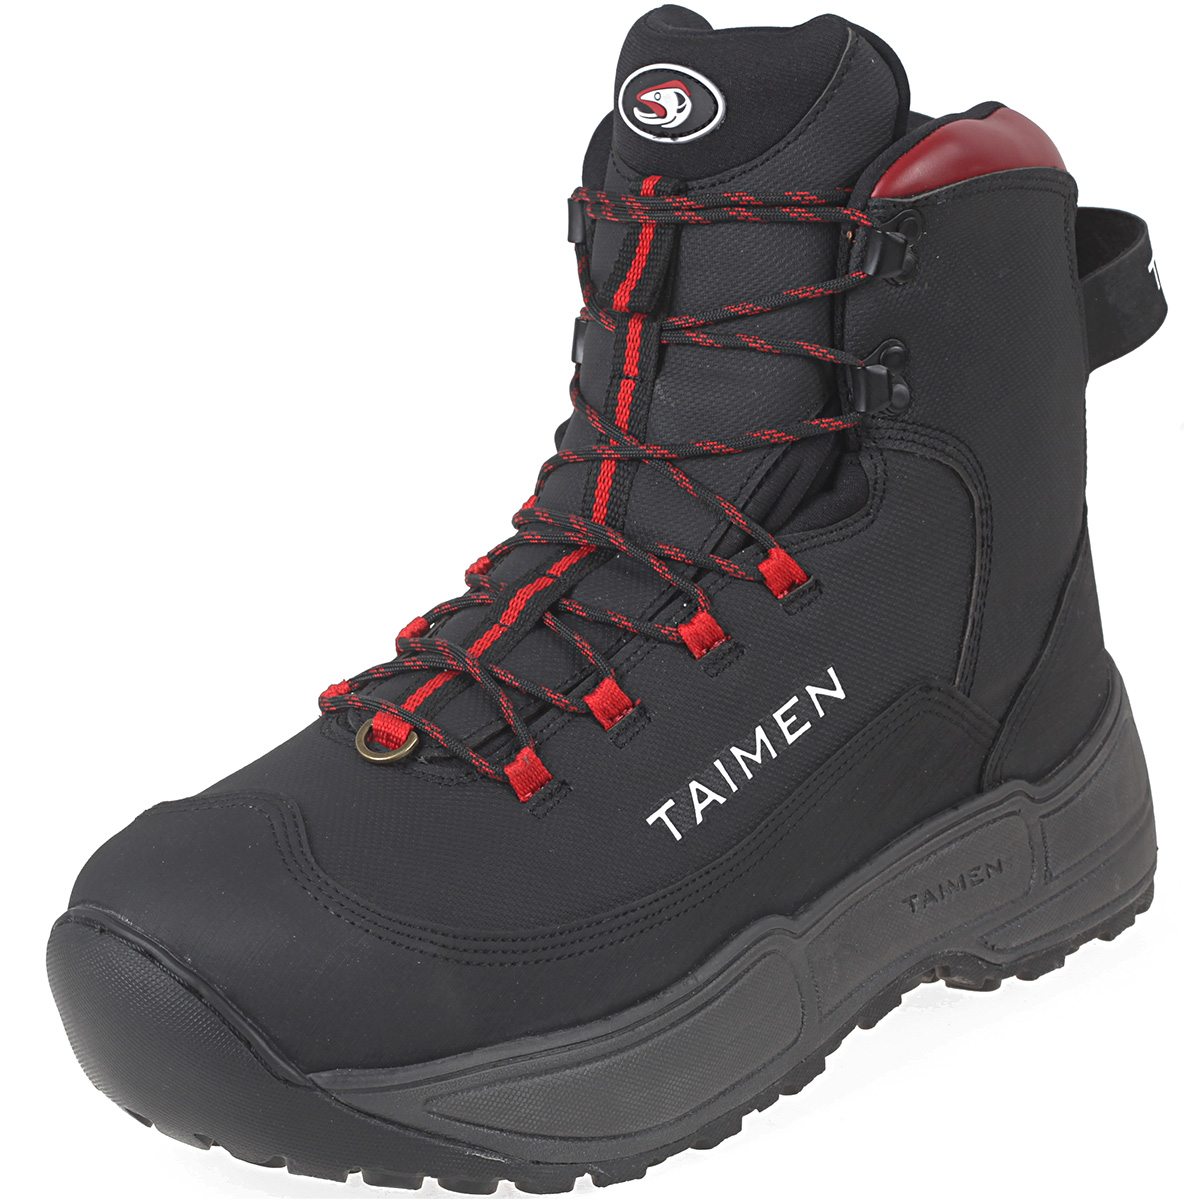 Taimen Onon Wading Boots (tugs. studs incl.)